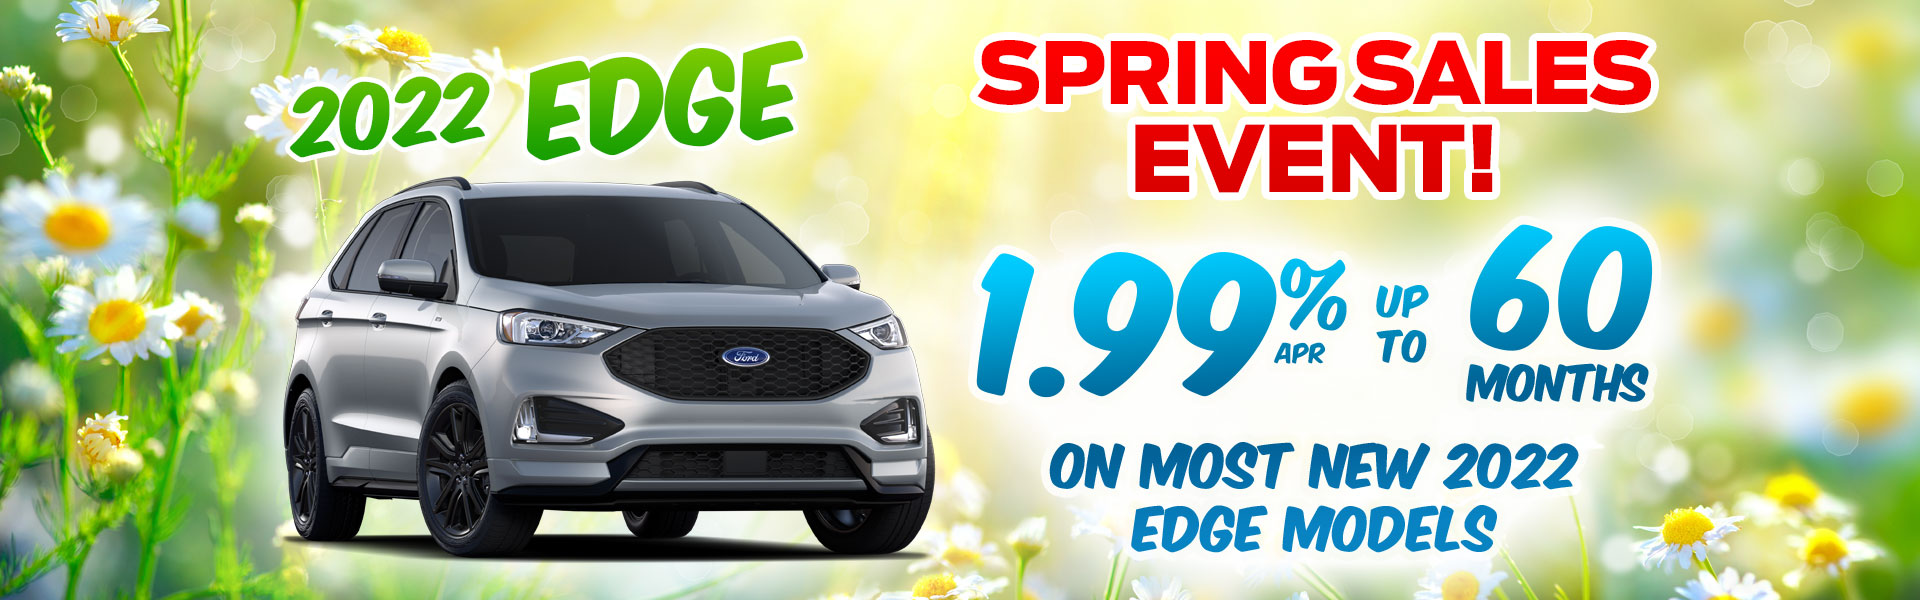 2022 Ford Edge Spring Sales Event